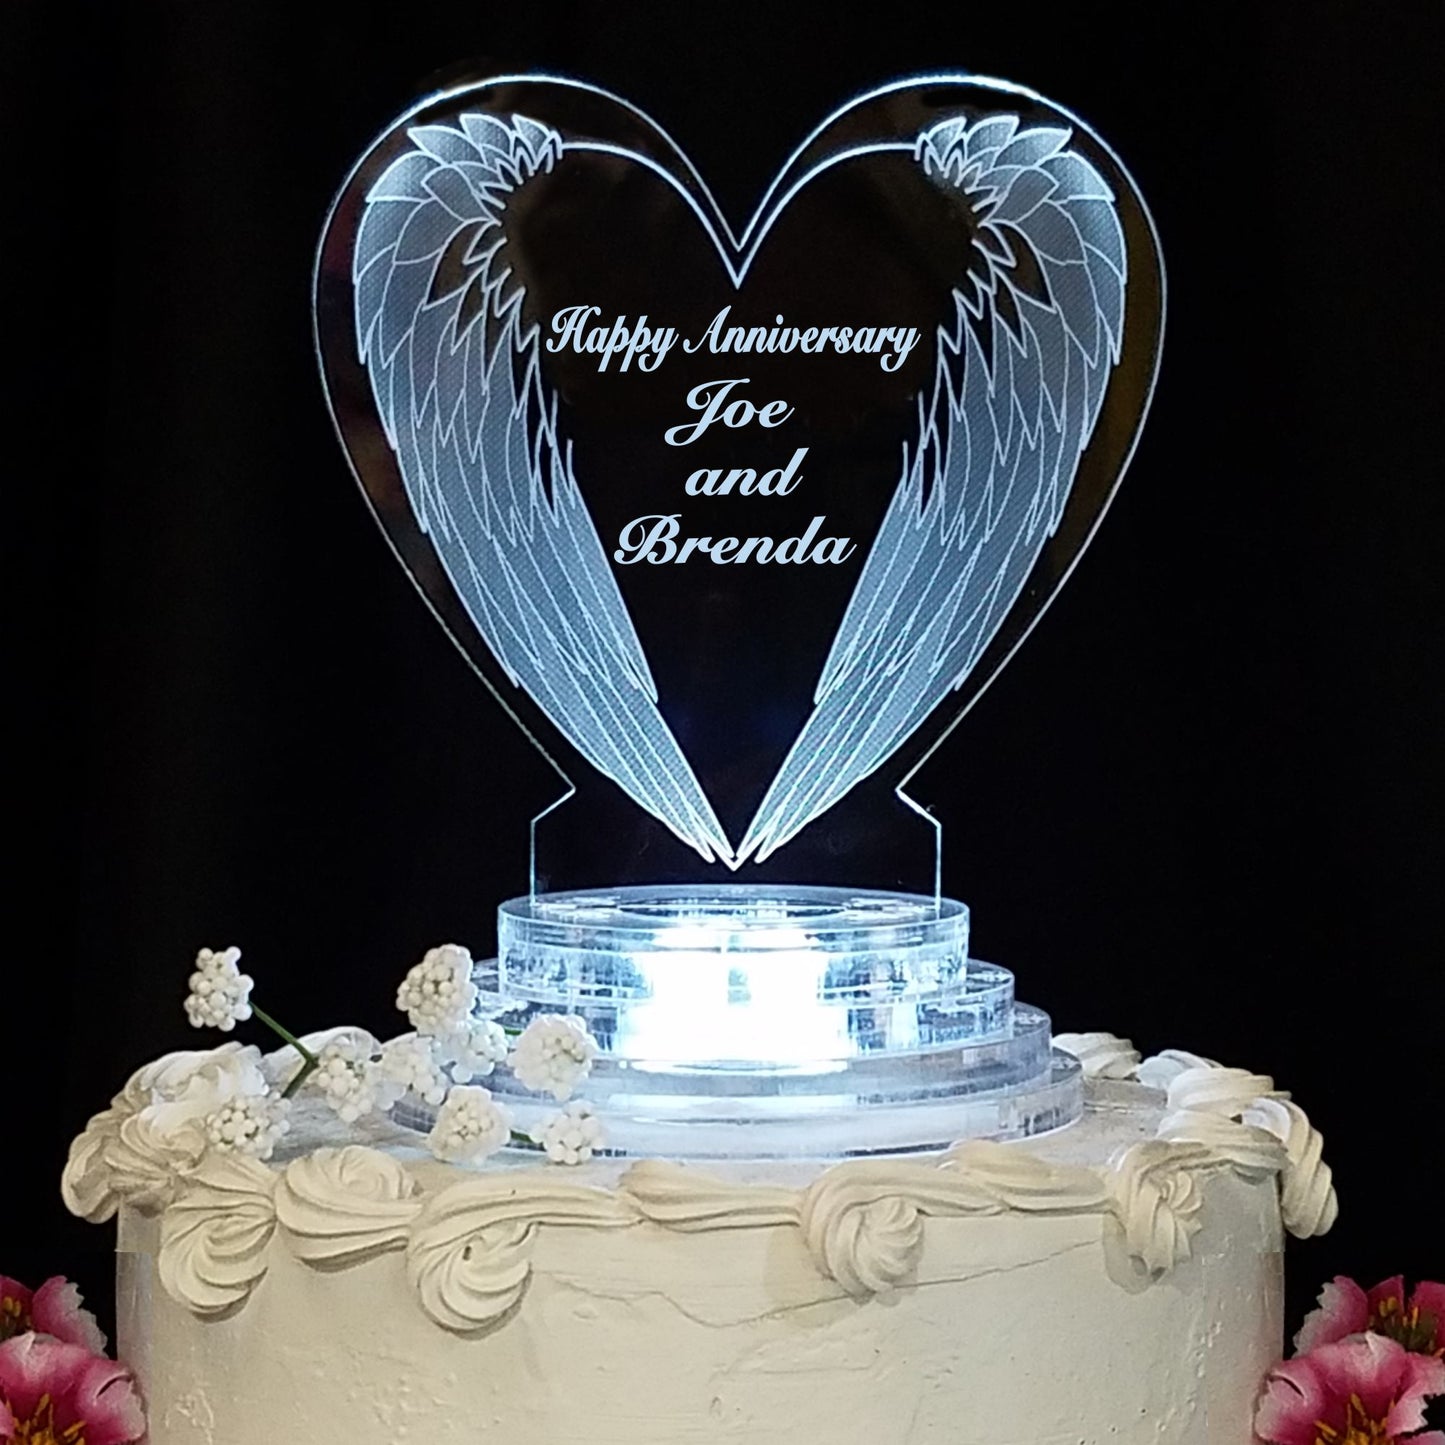 heart shaped acrylic cake topper designed with a downward angel wings design along with Happy Anniversary and names